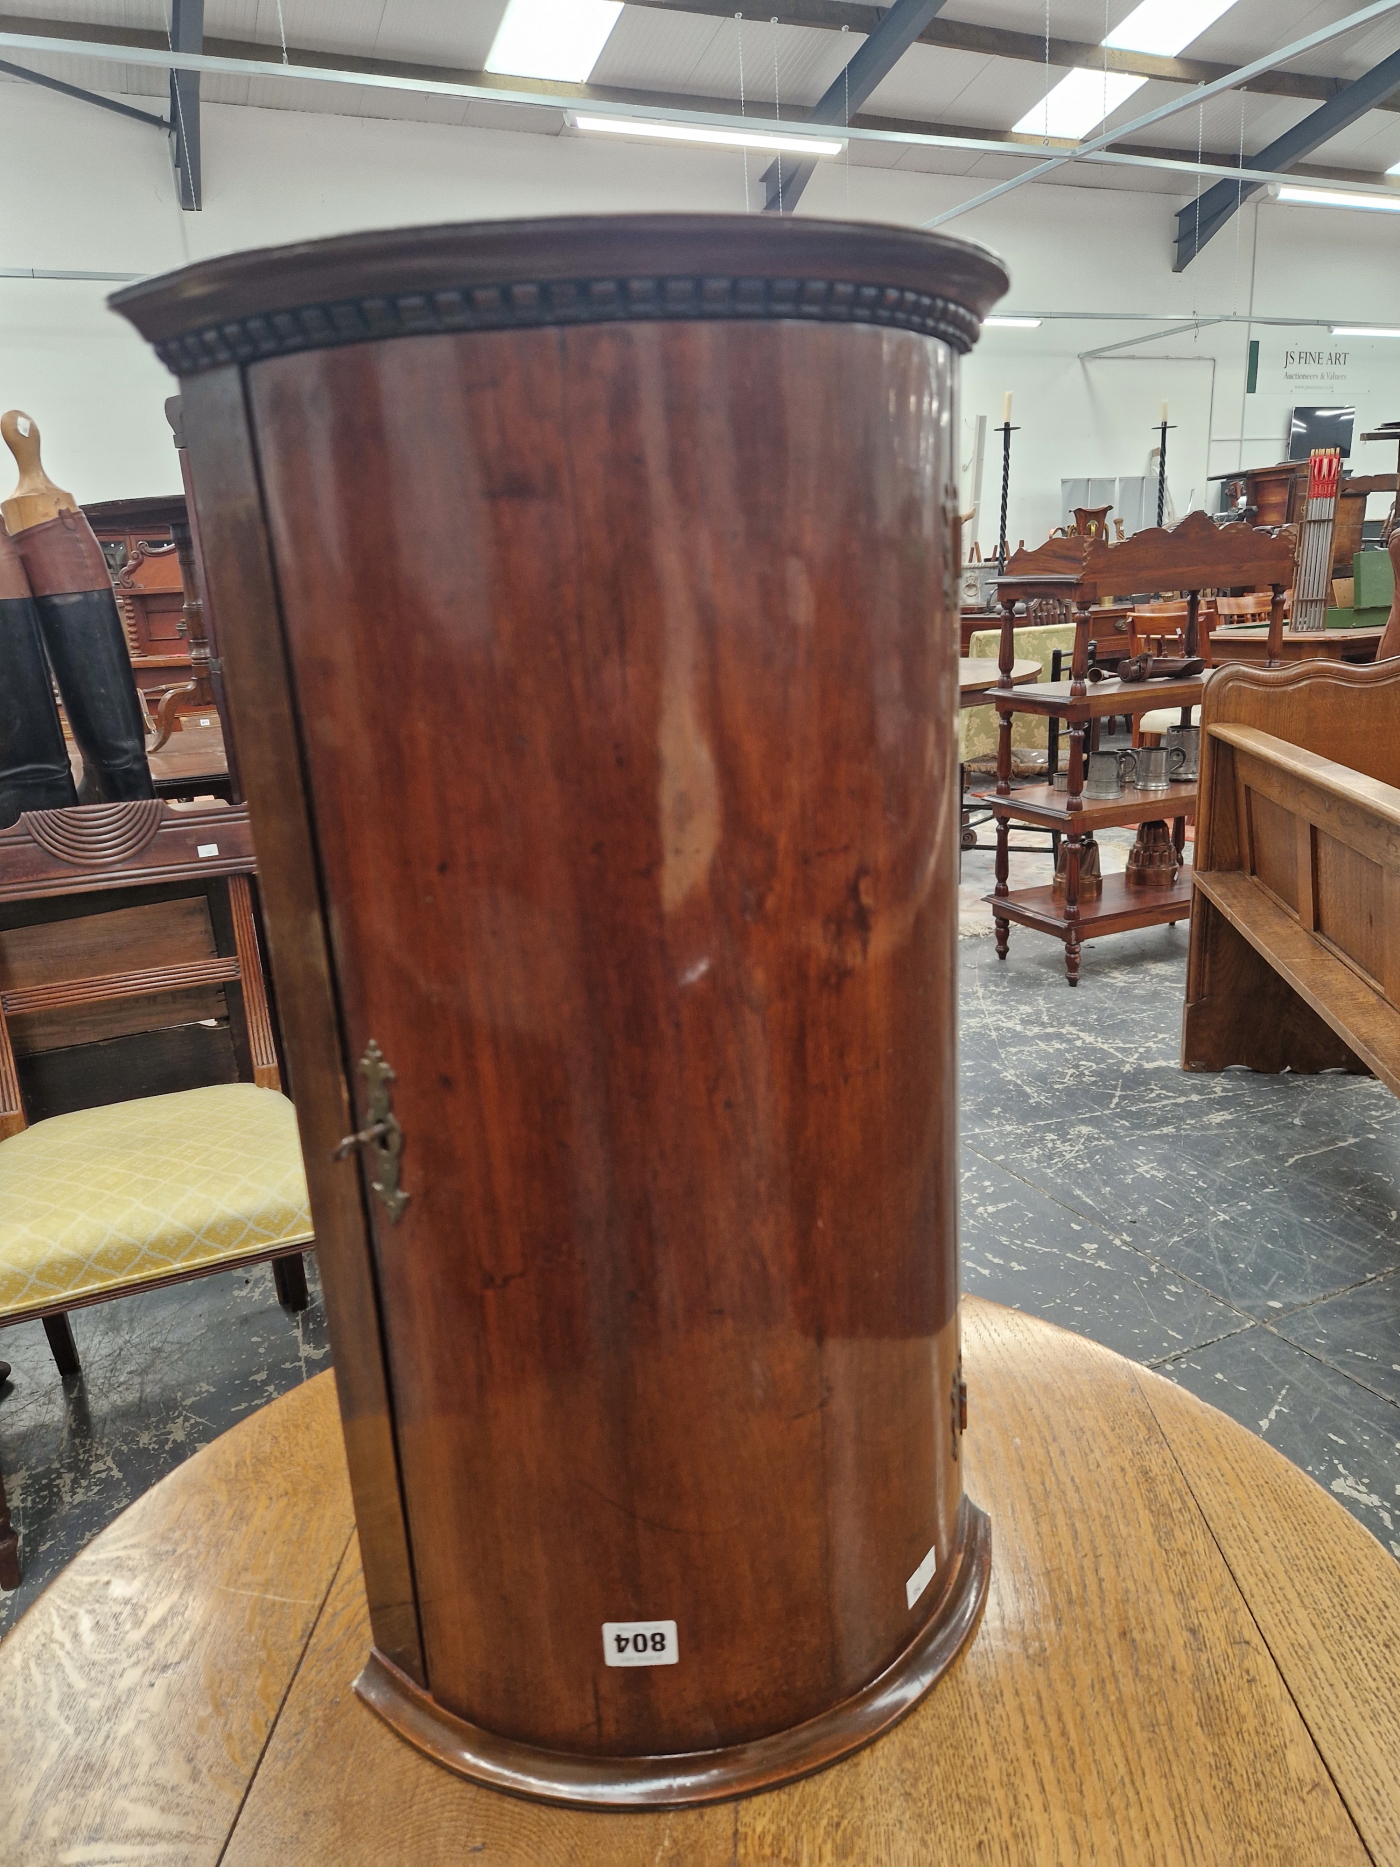 A MAHOGANY CORNER CUPBOARD WITH A QUARTER ROUND FRONTED DOOR - Image 3 of 3